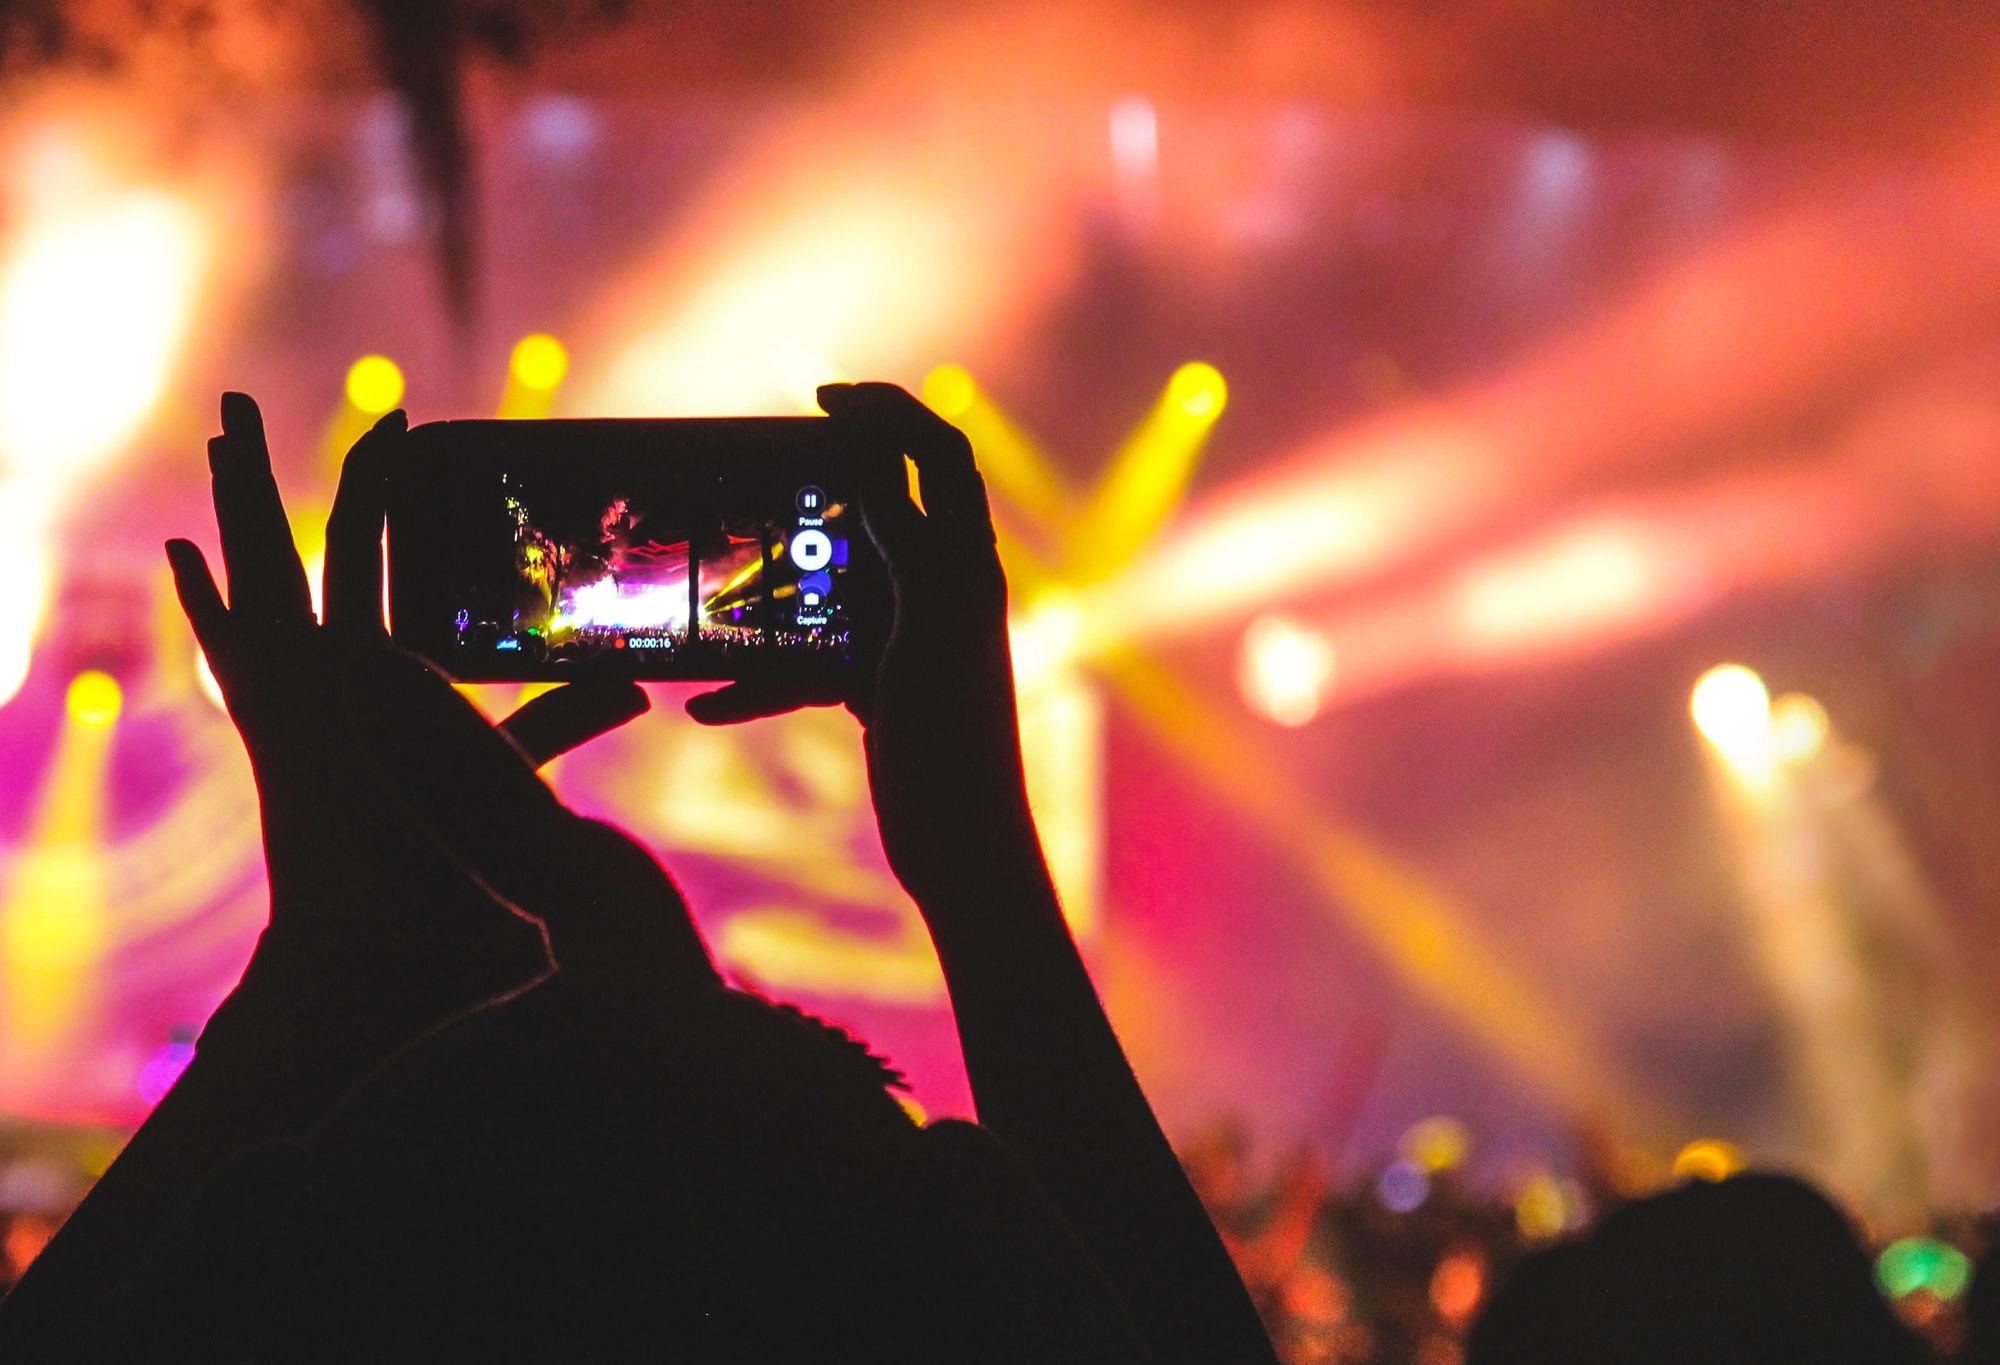 Watching a concert through mobile phones